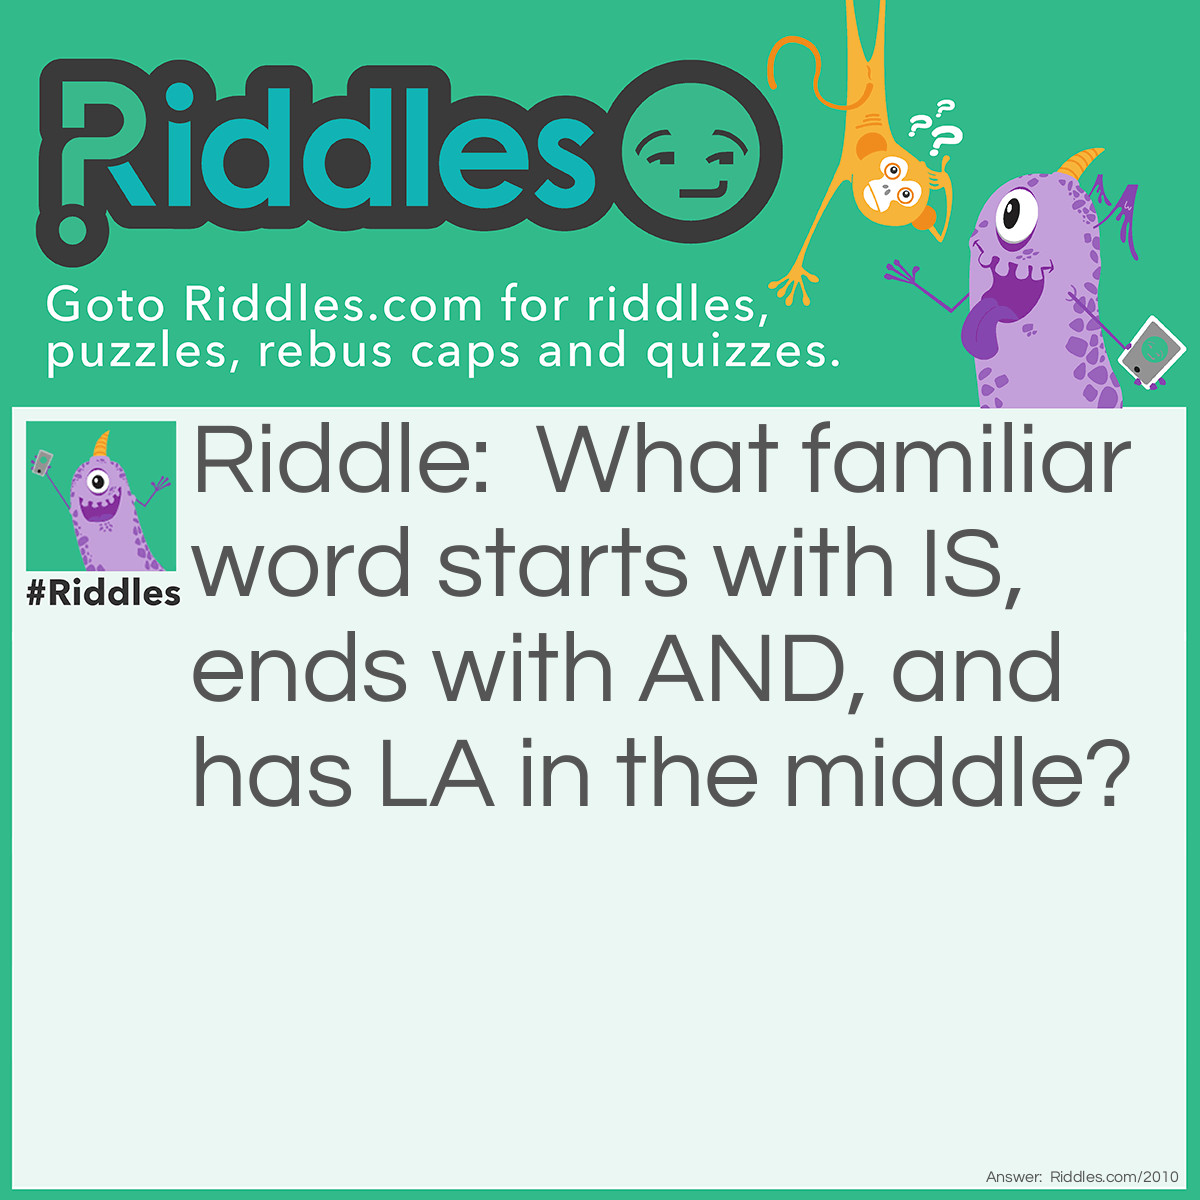 Riddle: What familiar word starts with IS, ends with AND, and has LA in the middle? Answer: ISLAND.